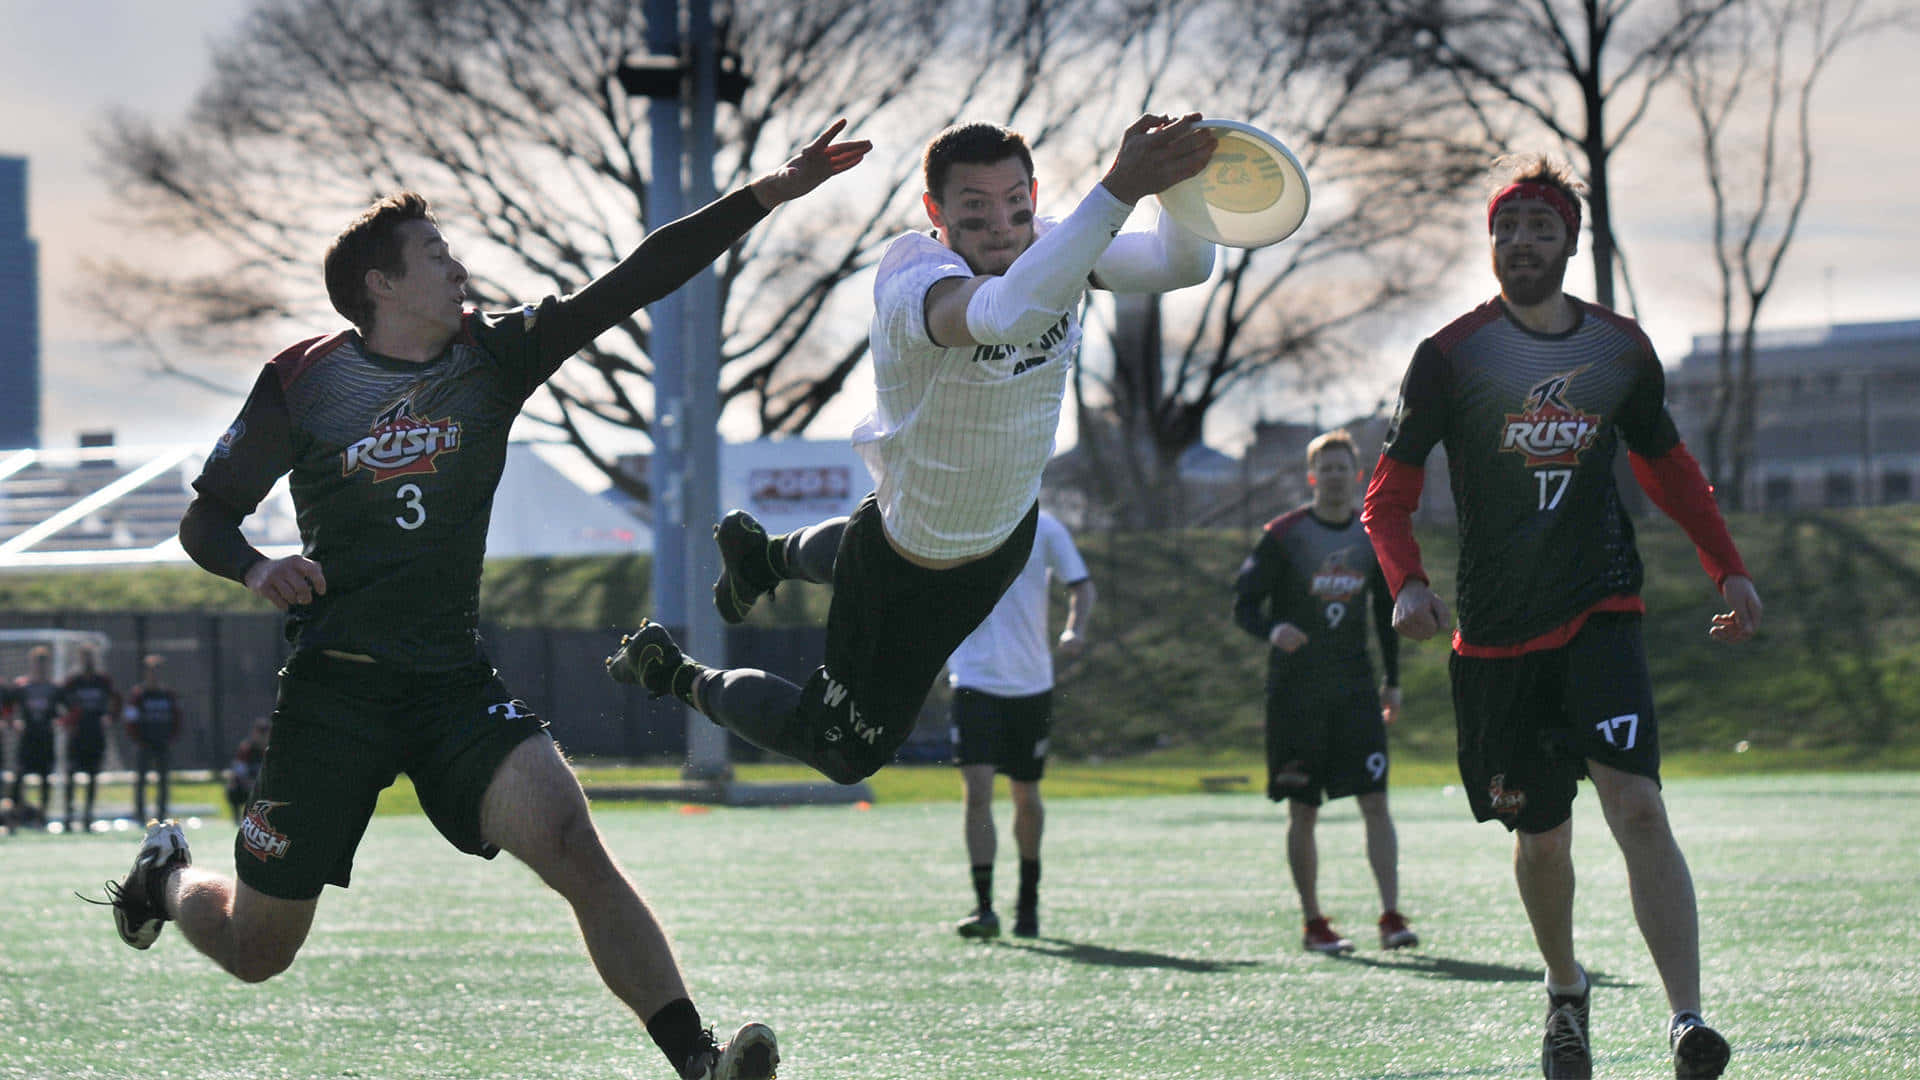 Player Leaping 1920x1080 Ultimate Frisbee Background